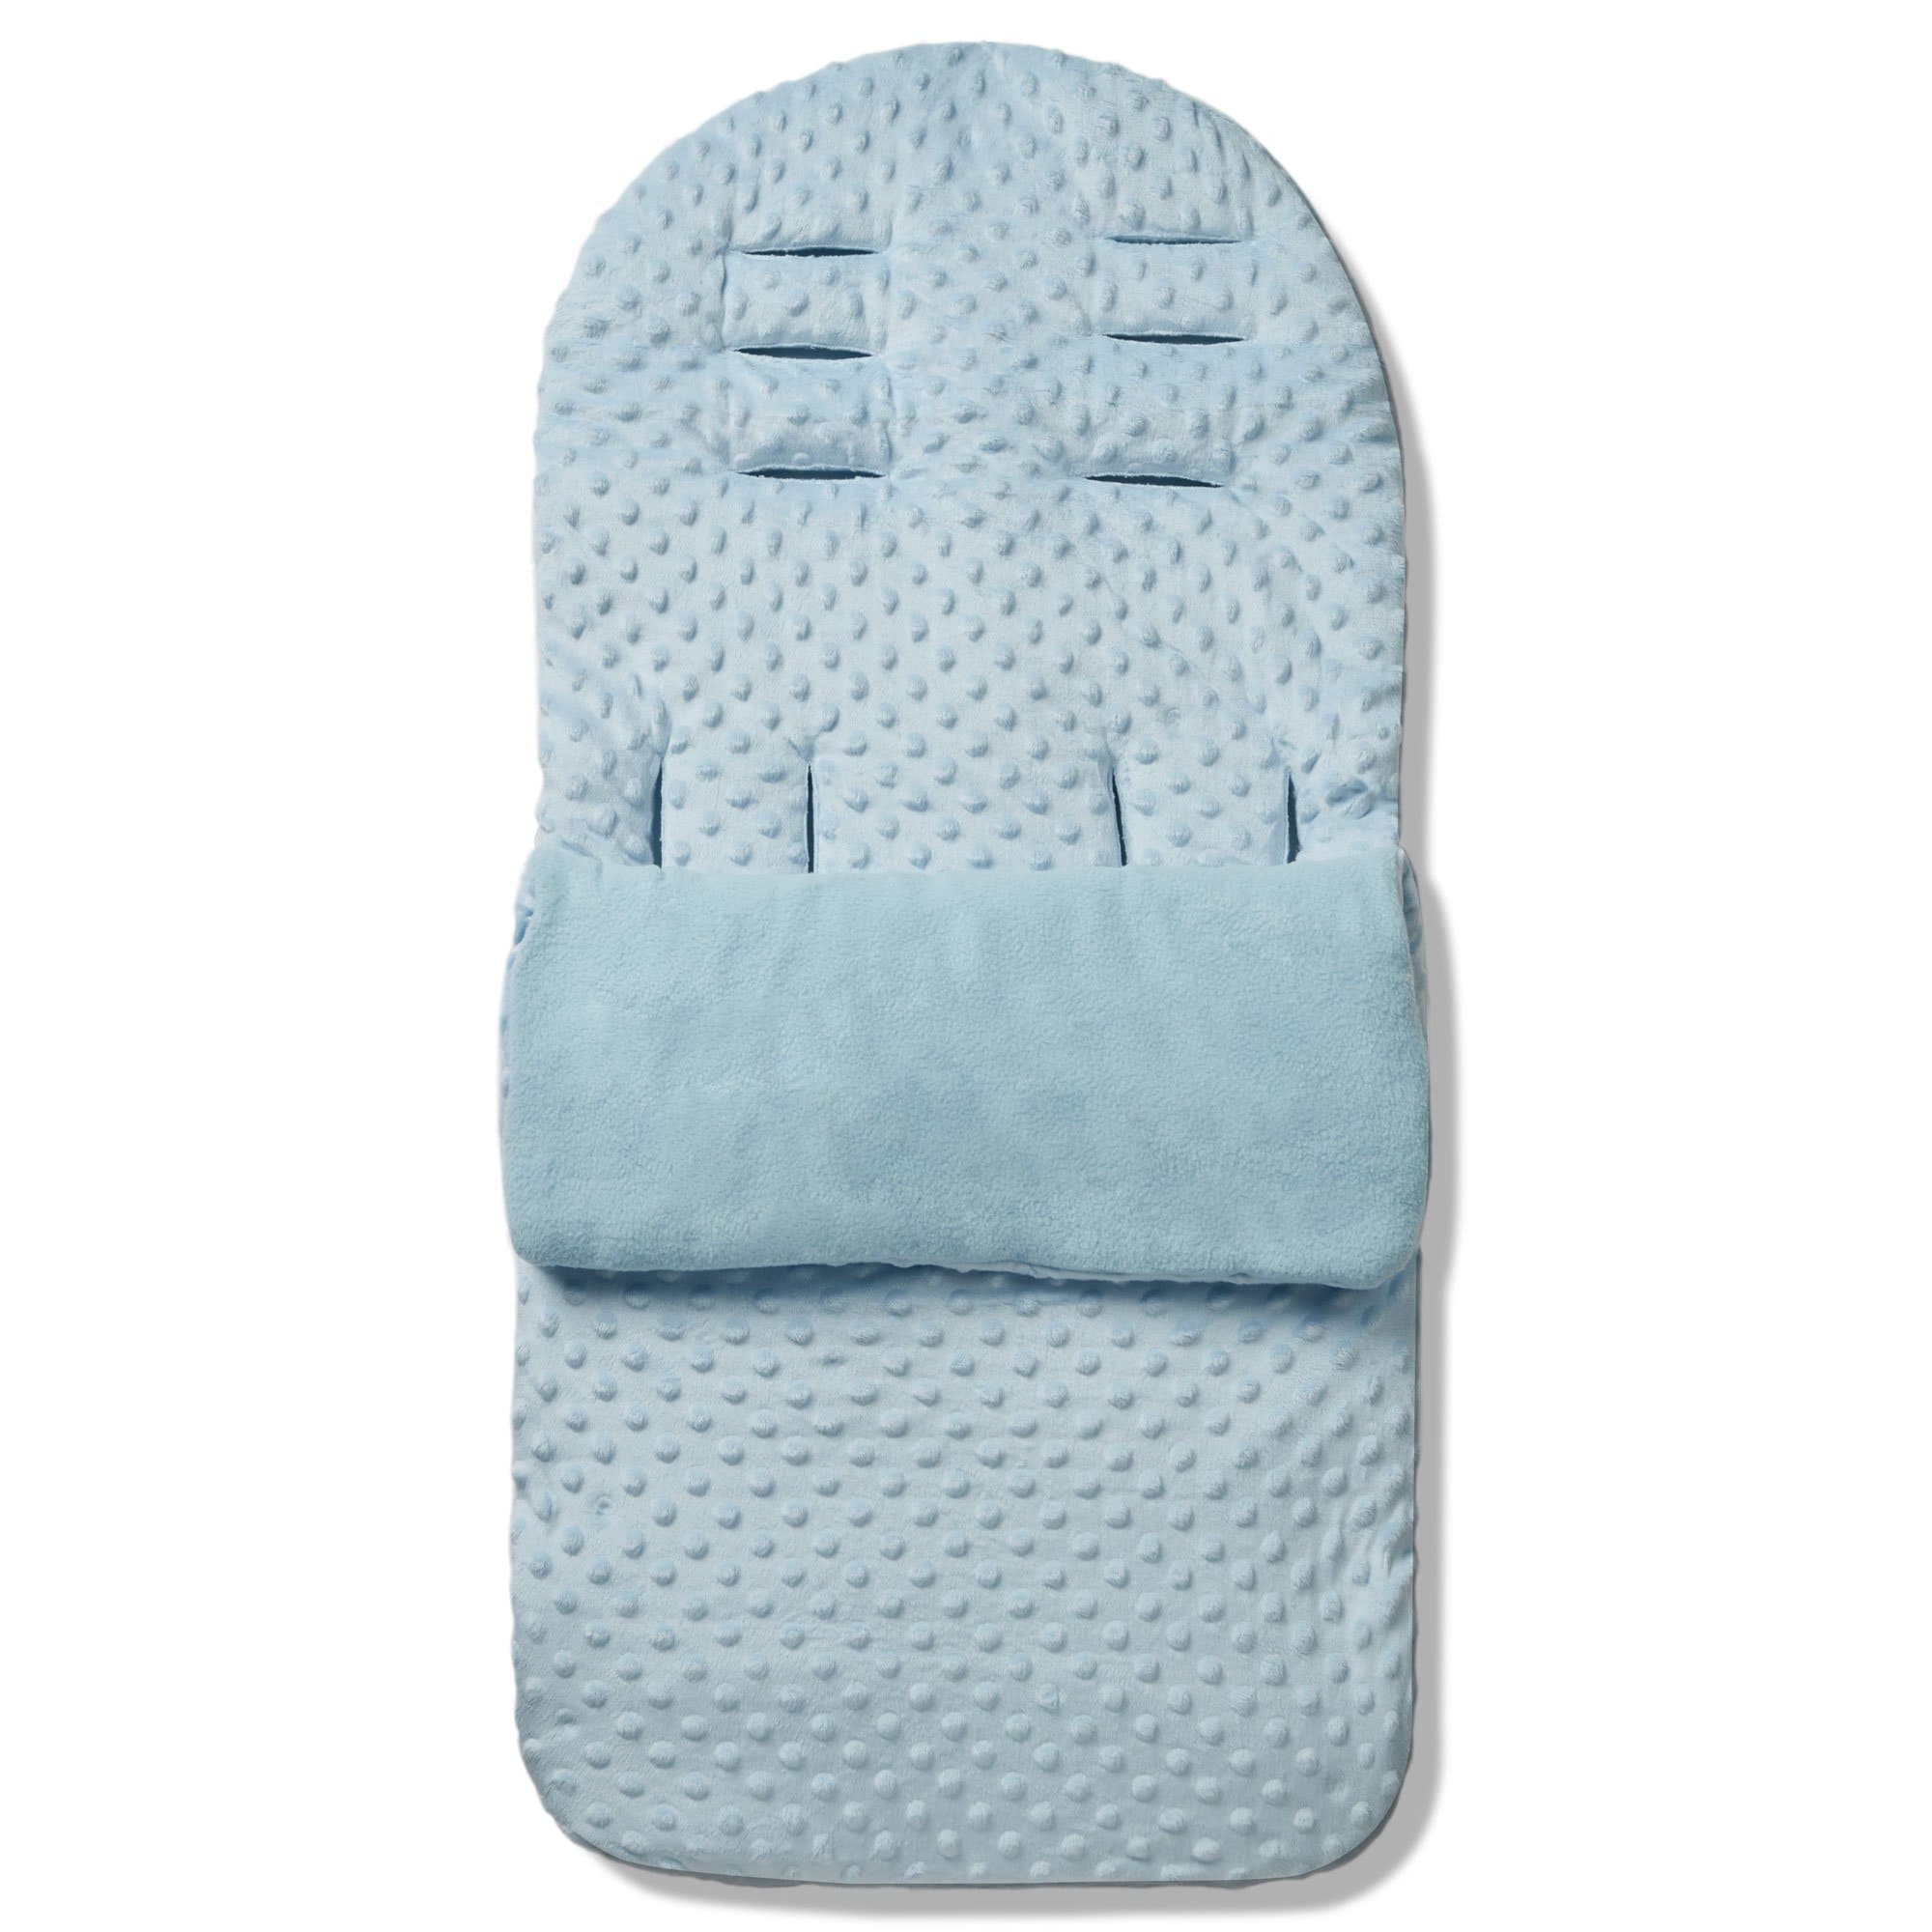 Dimple Footmuff / Cosy Toes Compatible with Venicci - Blue / Fits All Models | For Your Little One